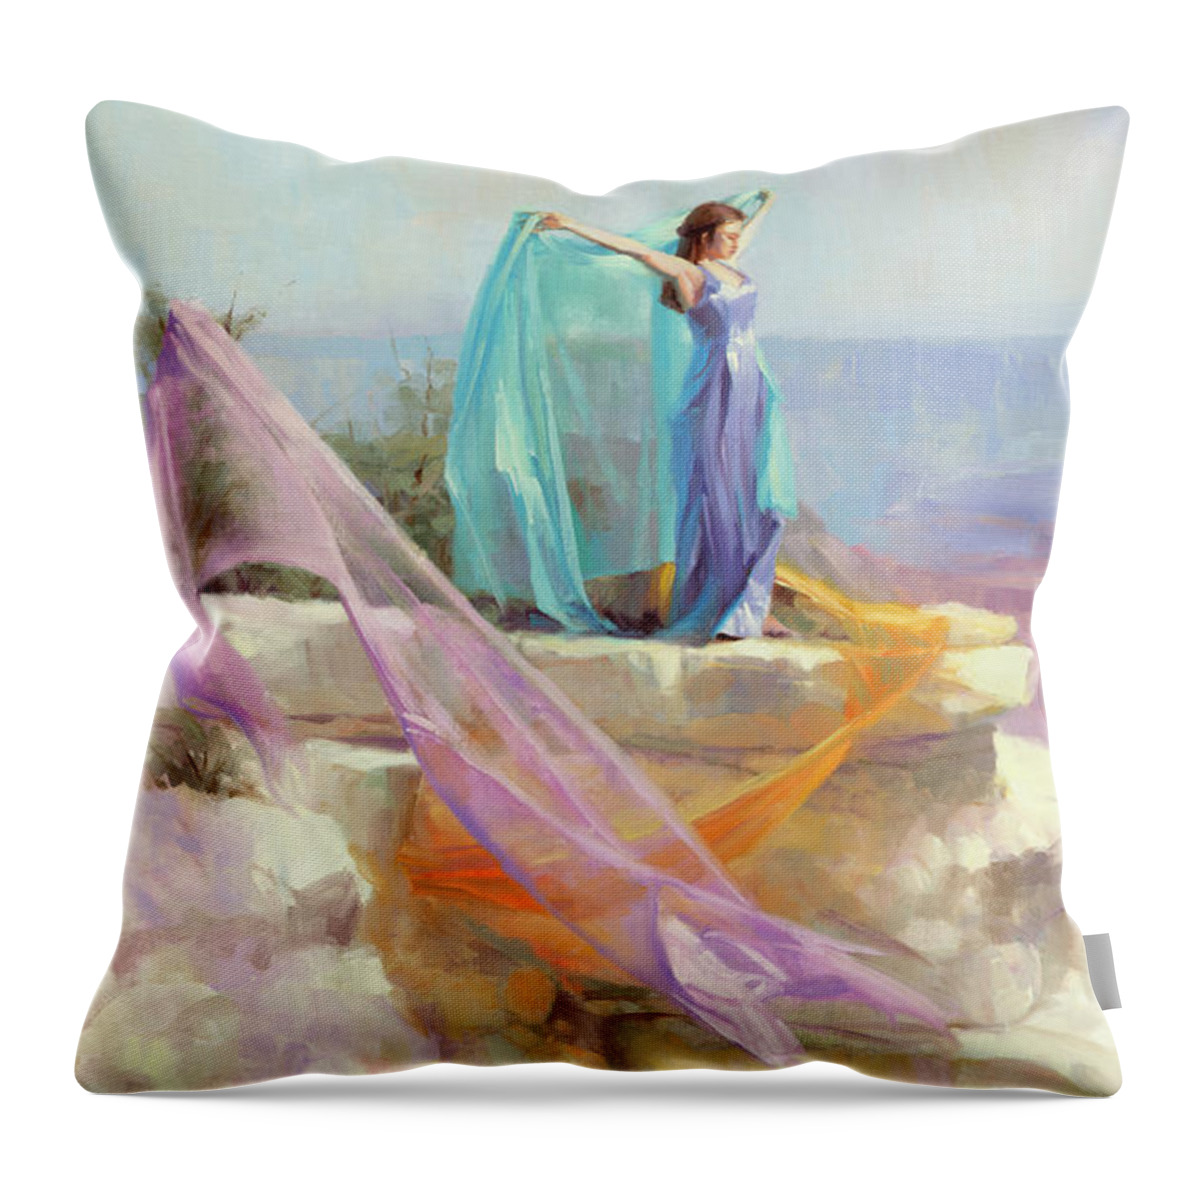 Southwest Throw Pillow featuring the painting Diaphanous by Steve Henderson